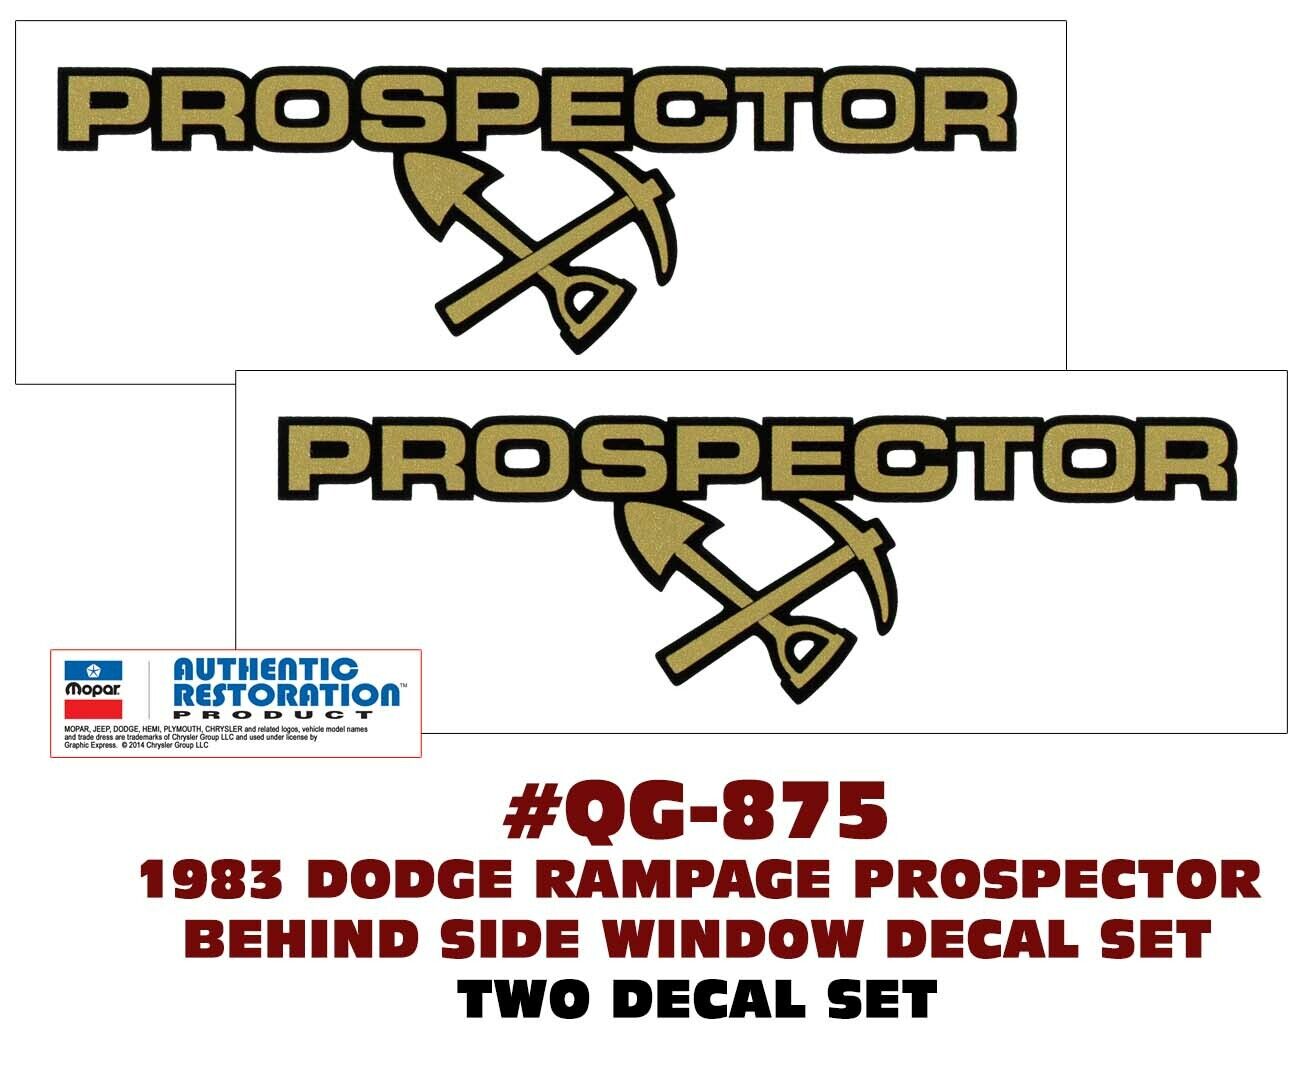 SP QG-875 1983 DODGE RAMPAGE 2.2 - PROSPECTOR SIDE DECAL SET - TWO DECALS